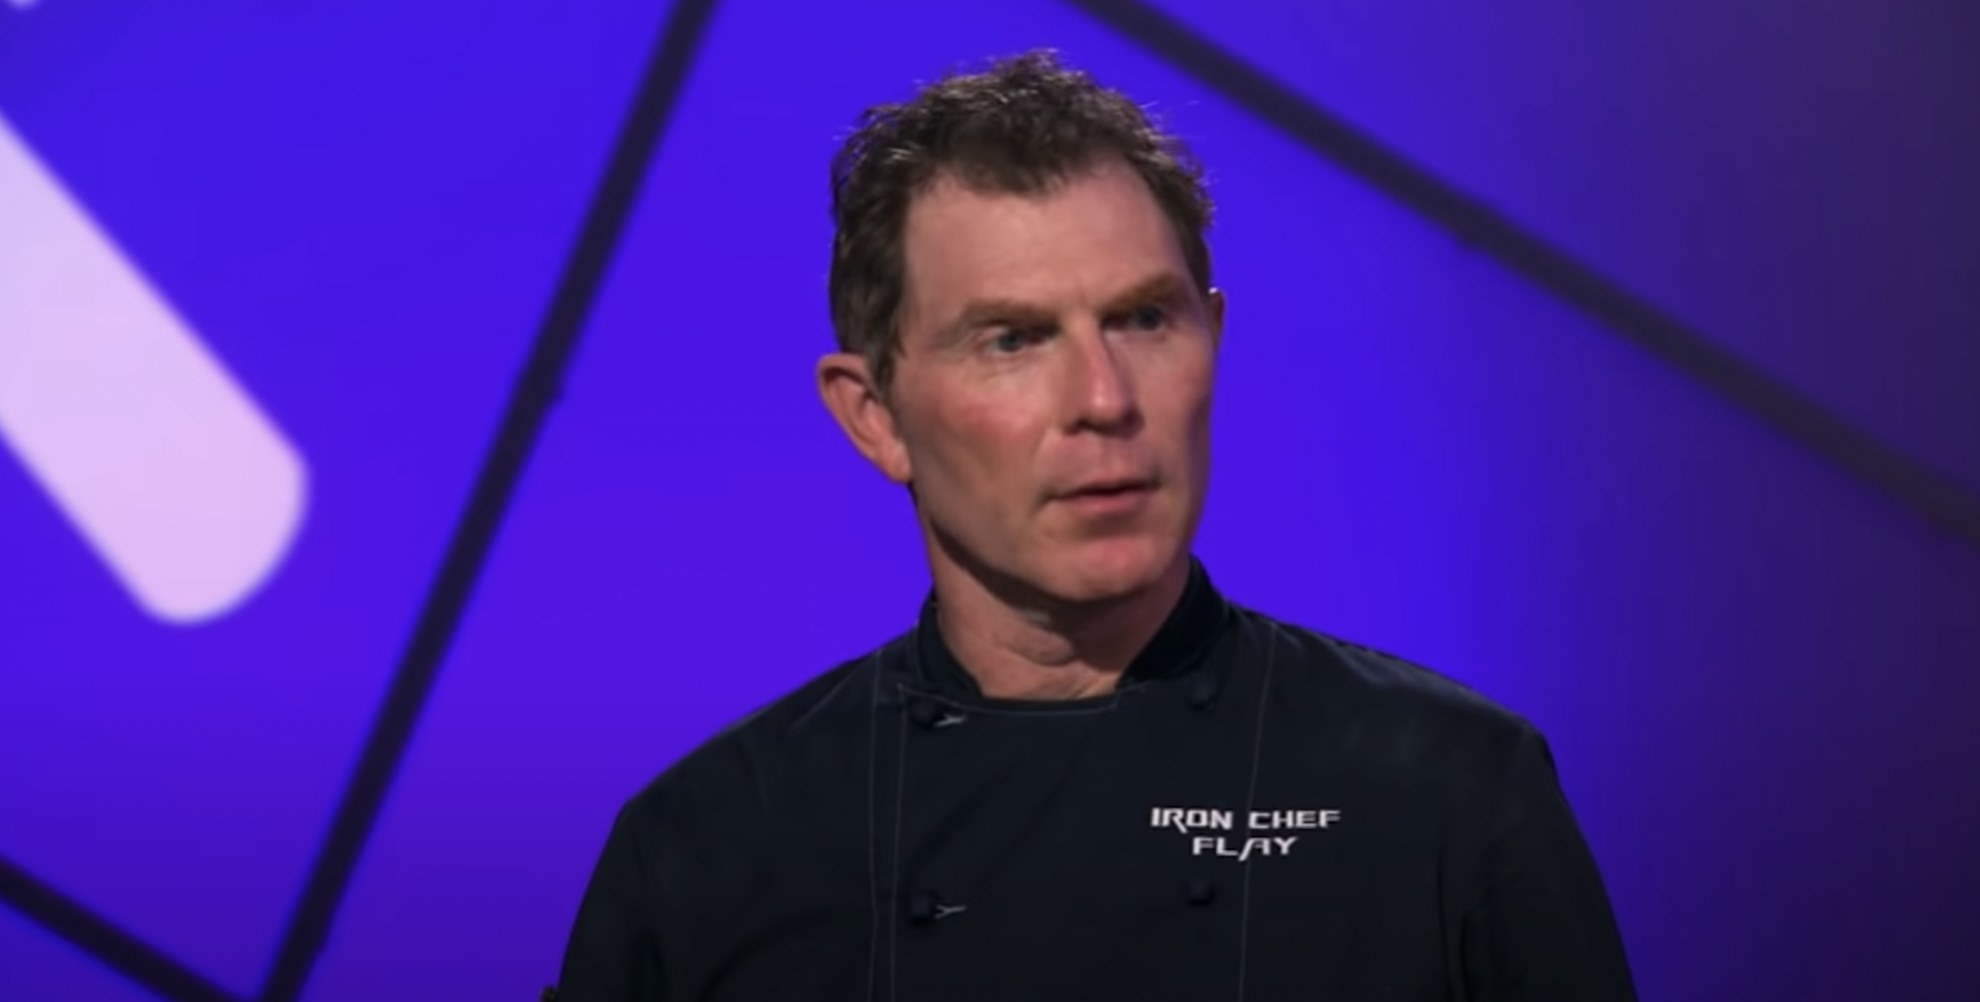 Bobby Flay in an Iron Chef uniform